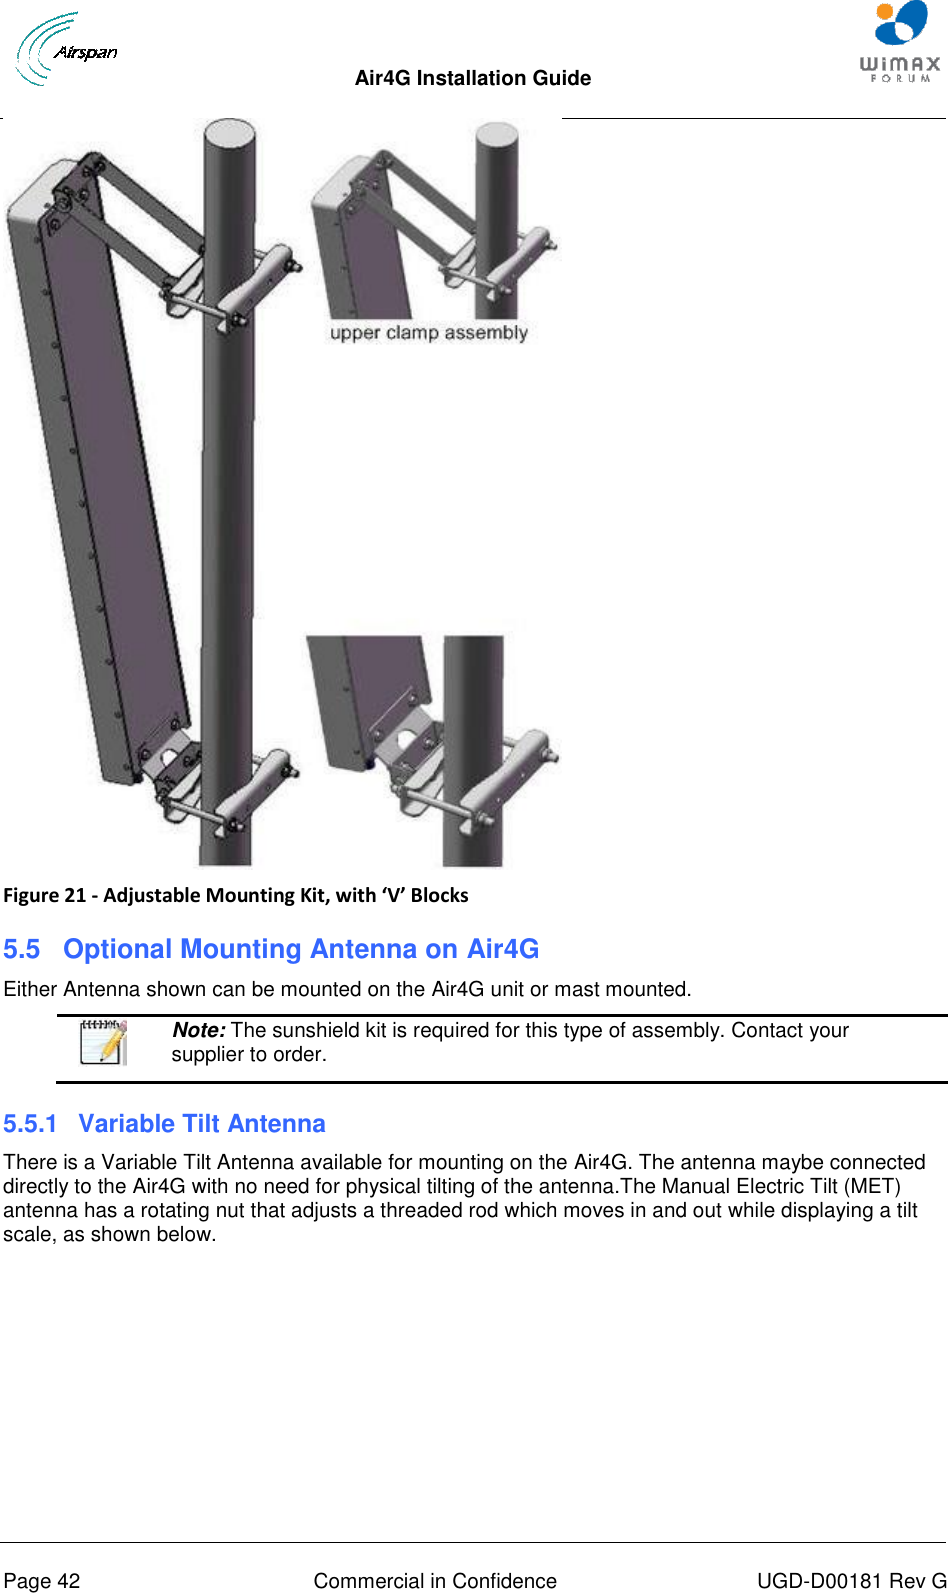  Air4G Installation Guide       Page 42  Commercial in Confidence  UGD-D00181 Rev G  Figure 21 - Adjustable Mounting Kit, with ‘V’ Blocks 5.5  Optional Mounting Antenna on Air4G Either Antenna shown can be mounted on the Air4G unit or mast mounted.   Note: The sunshield kit is required for this type of assembly. Contact your supplier to order. 5.5.1  Variable Tilt Antenna There is a Variable Tilt Antenna available for mounting on the Air4G. The antenna maybe connected directly to the Air4G with no need for physical tilting of the antenna.The Manual Electric Tilt (MET) antenna has a rotating nut that adjusts a threaded rod which moves in and out while displaying a tilt scale, as shown below. 